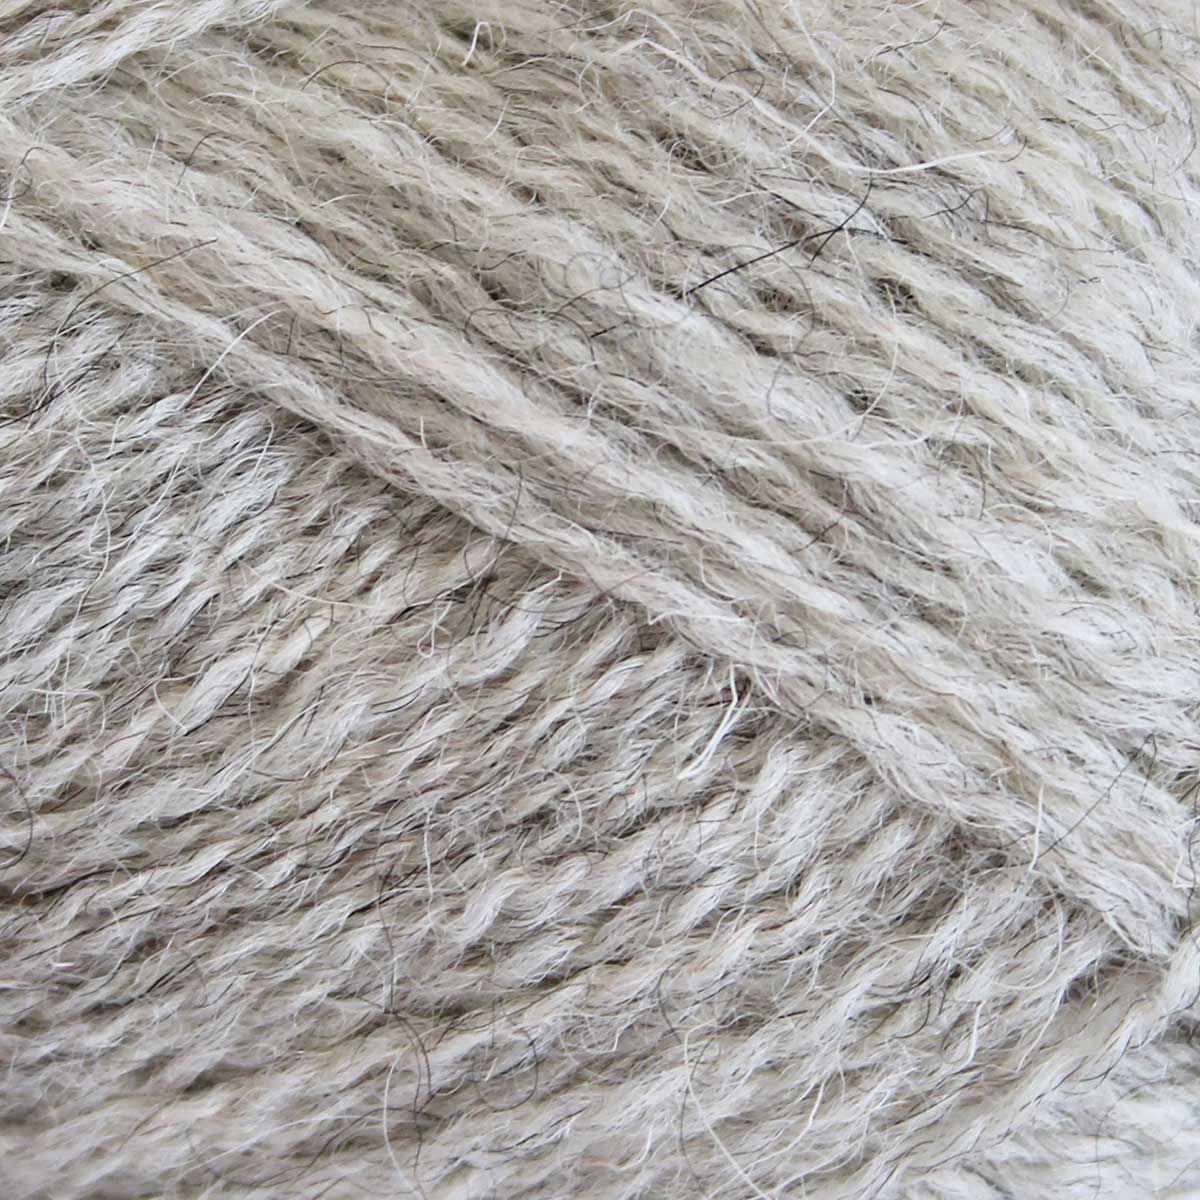 Pip Naturals (Undyed) 4ply Pack Of 10: 100% British Hand Knitting Wool 25g Ball